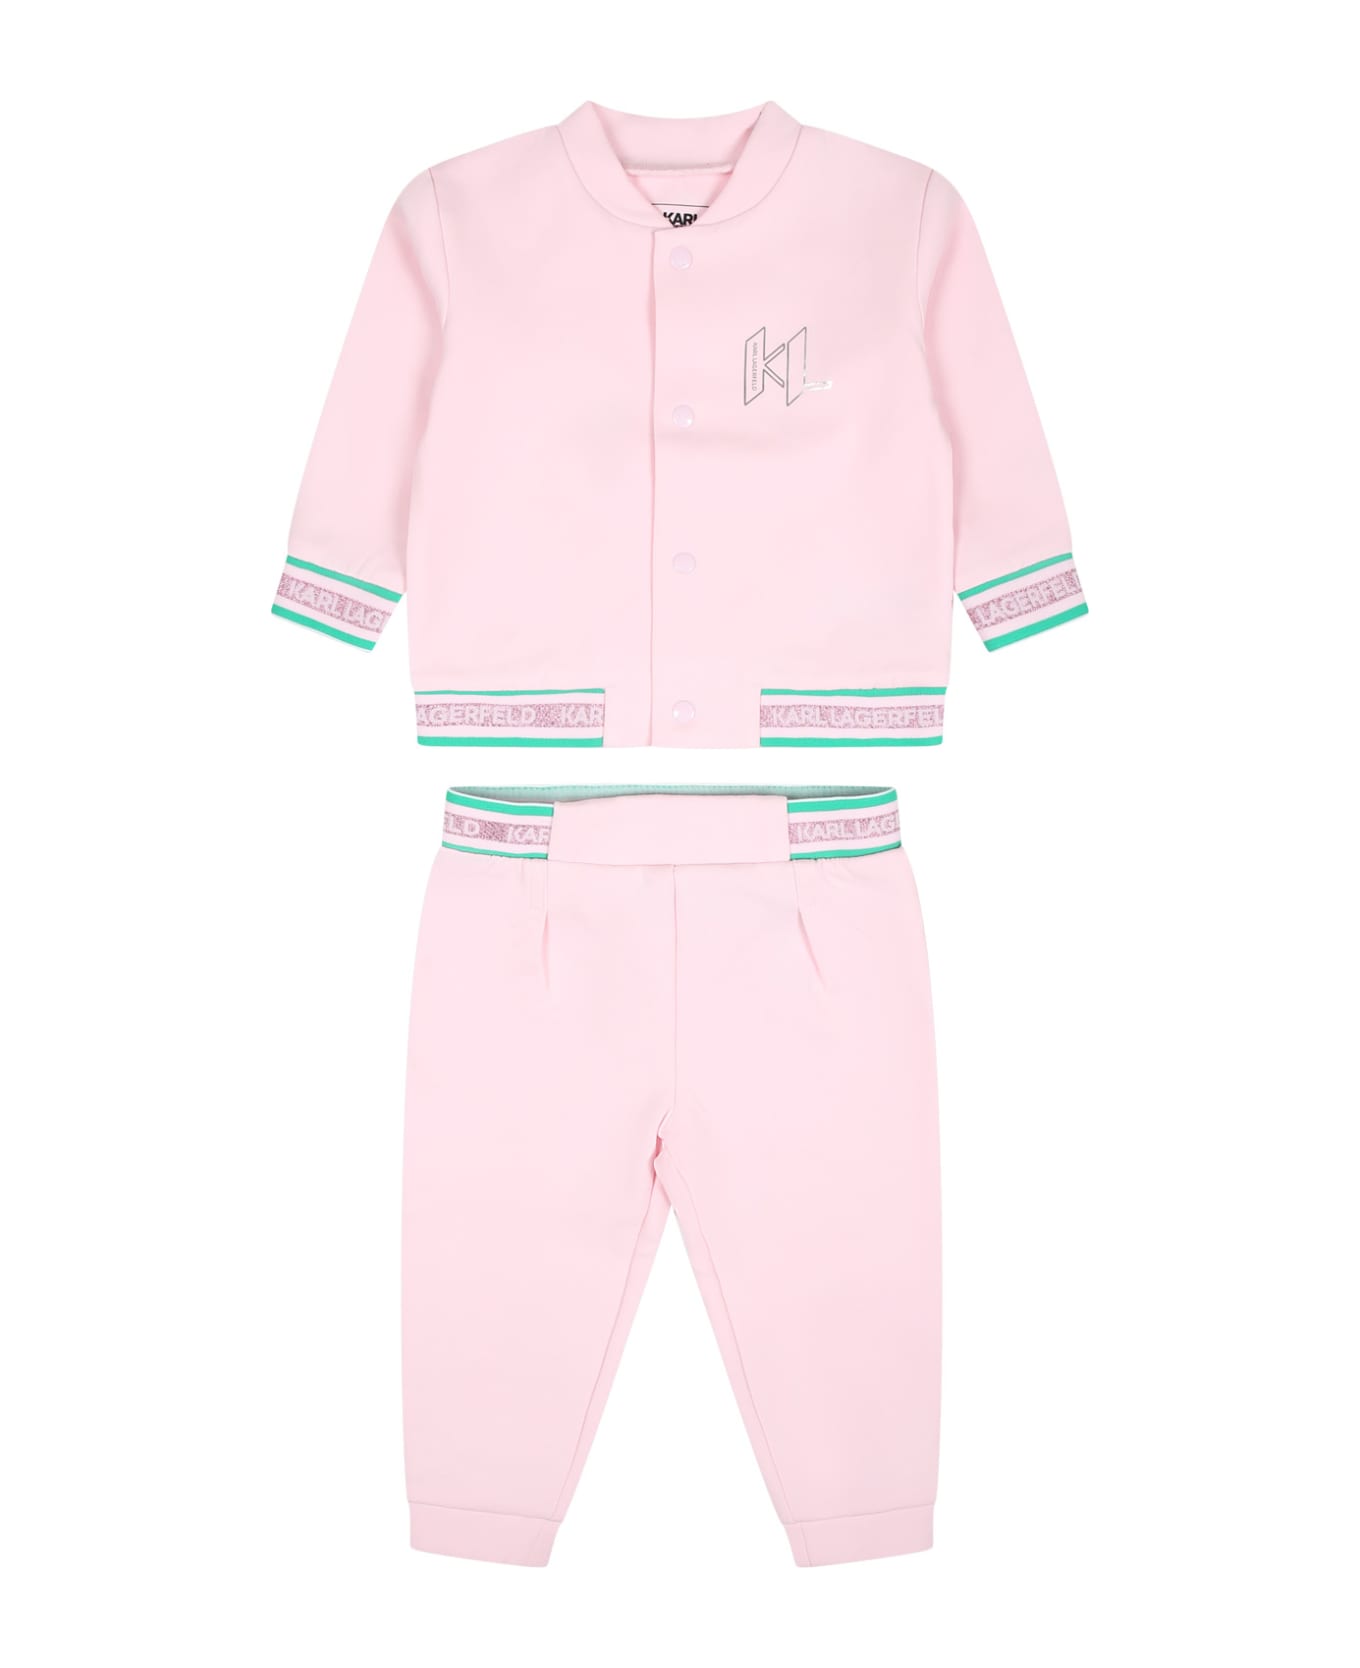 Karl Lagerfeld Kids Pink Set For Baby Girl With Logo - Pink